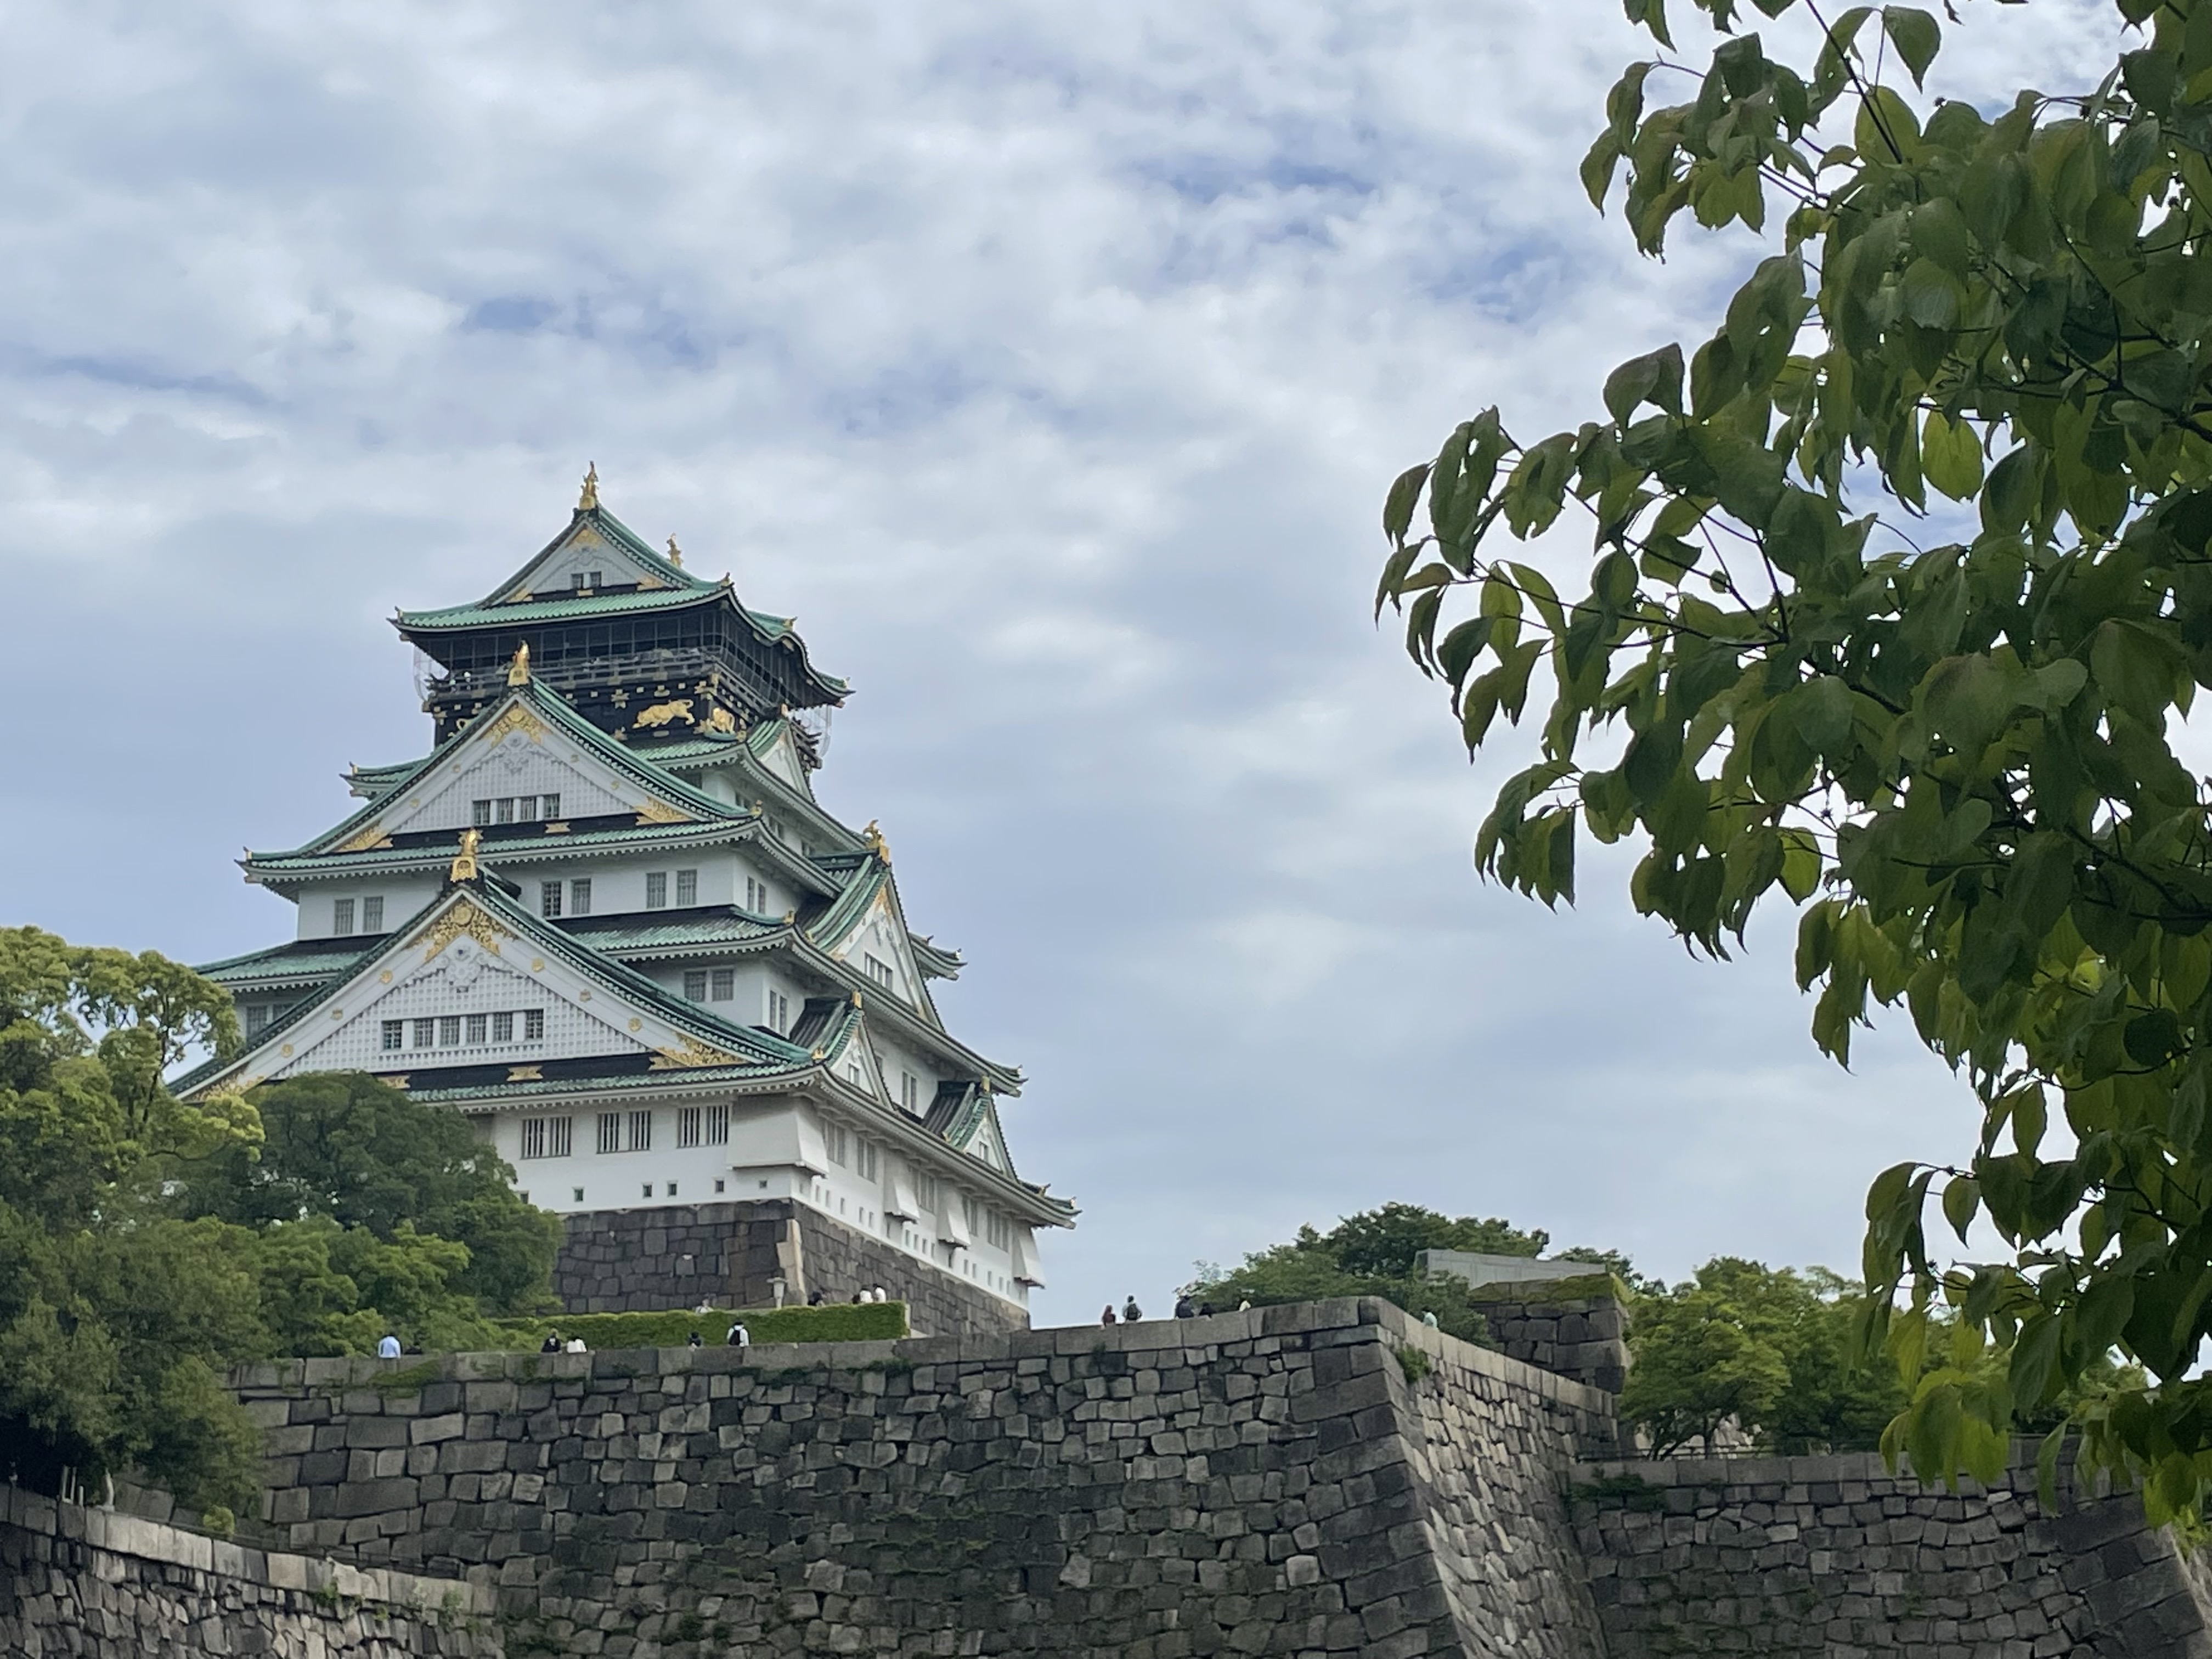 To Write A Poem Looking Around The Osaka Castle The 2nd Poem